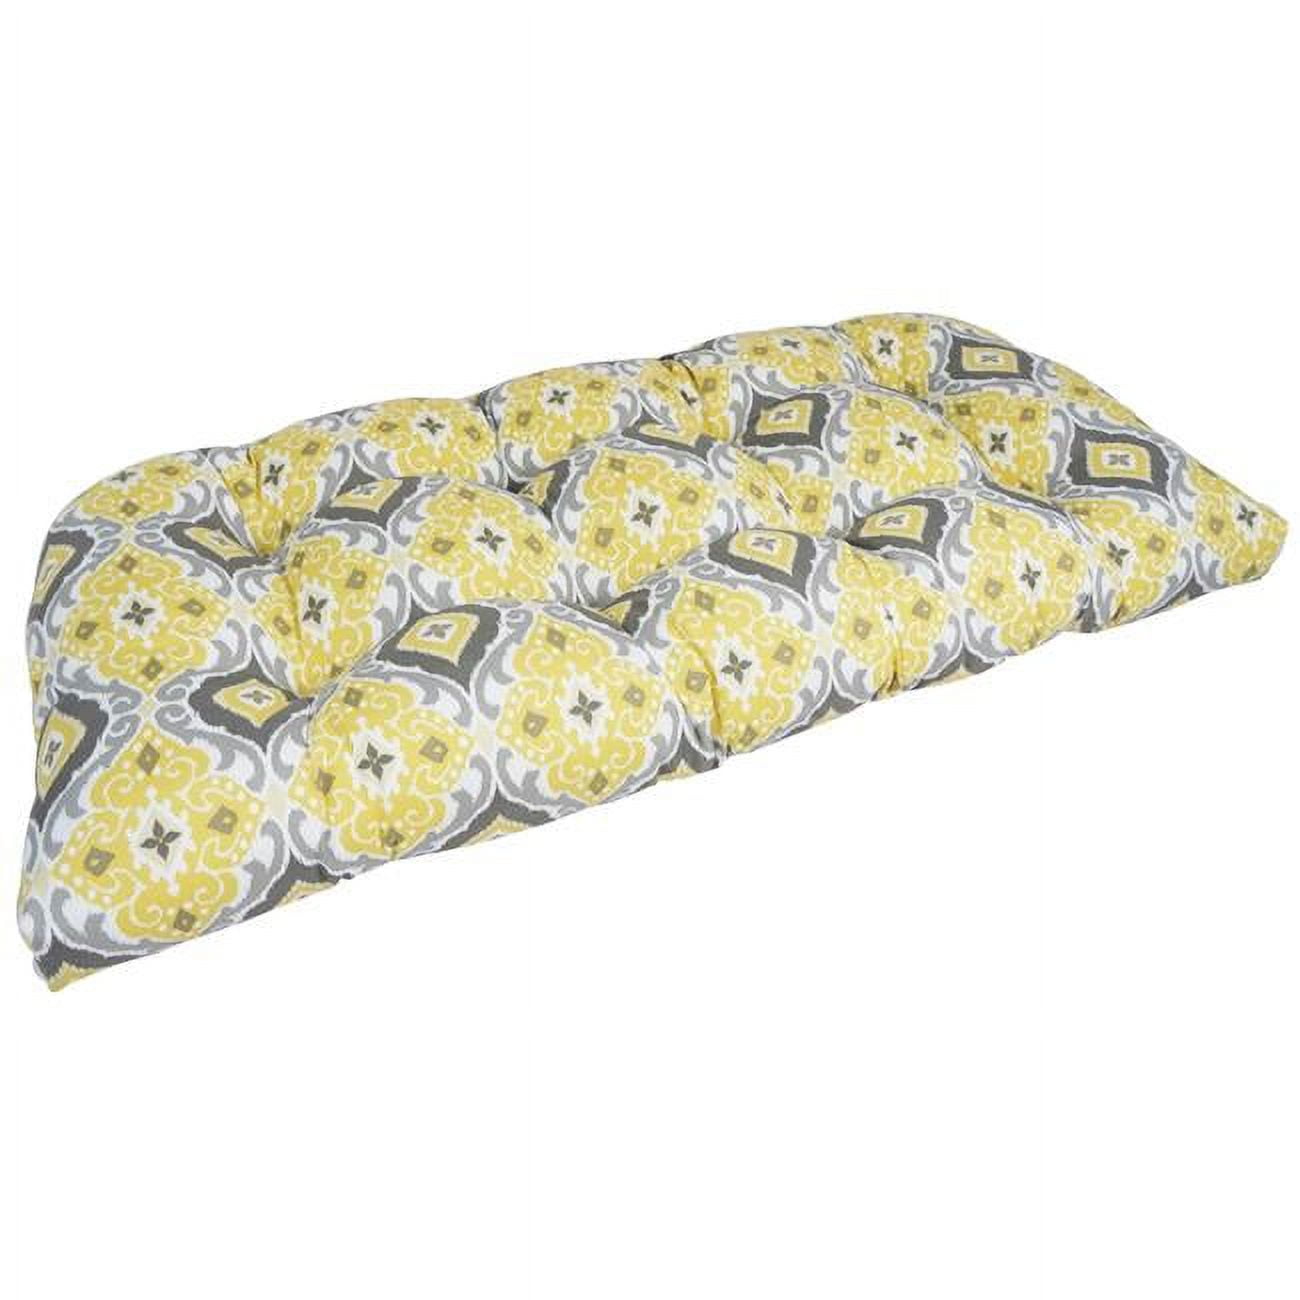 Picture of Blazing Needles 93180-LS-JO15-14 42 x 19 in. U-Shaped Patterned Spun Polyester Tufted Settee & Bench Cushion&#44; Yellow & Gray Ogee